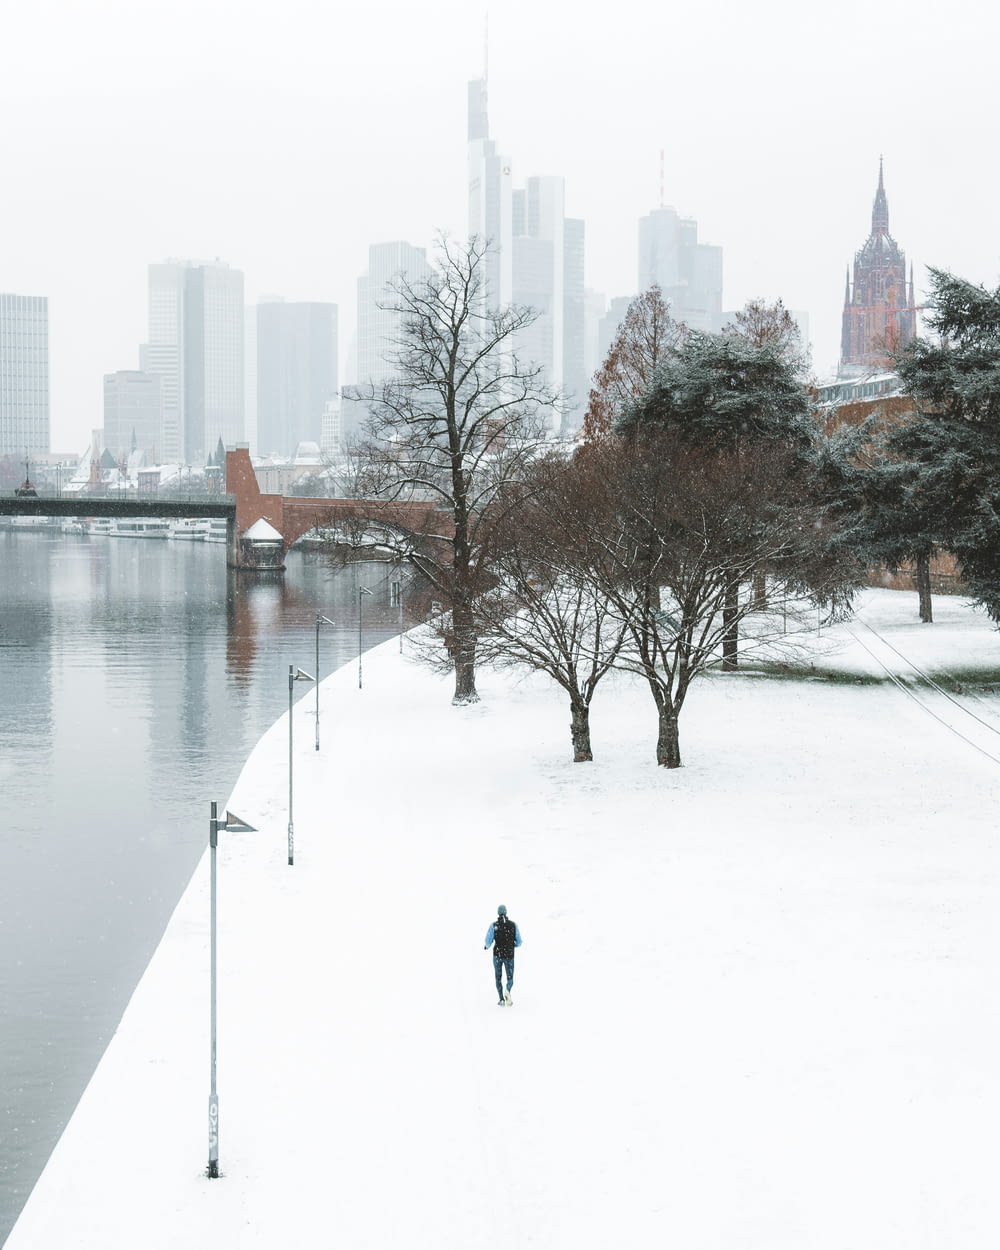 a person walking in the snow next to a body of water